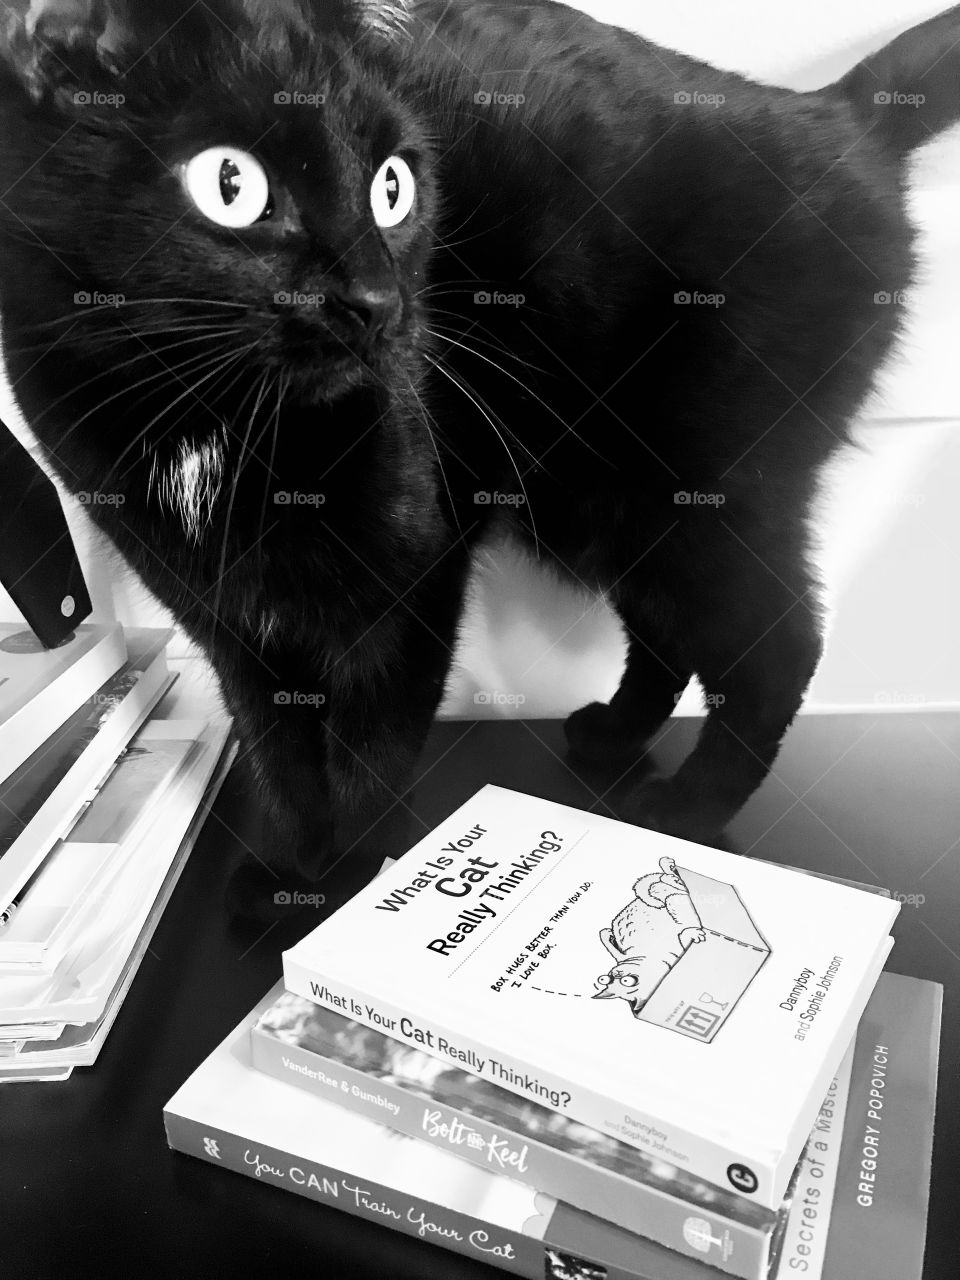 Black and white photo of various cat books stacked on top of each other with black cat in background. 